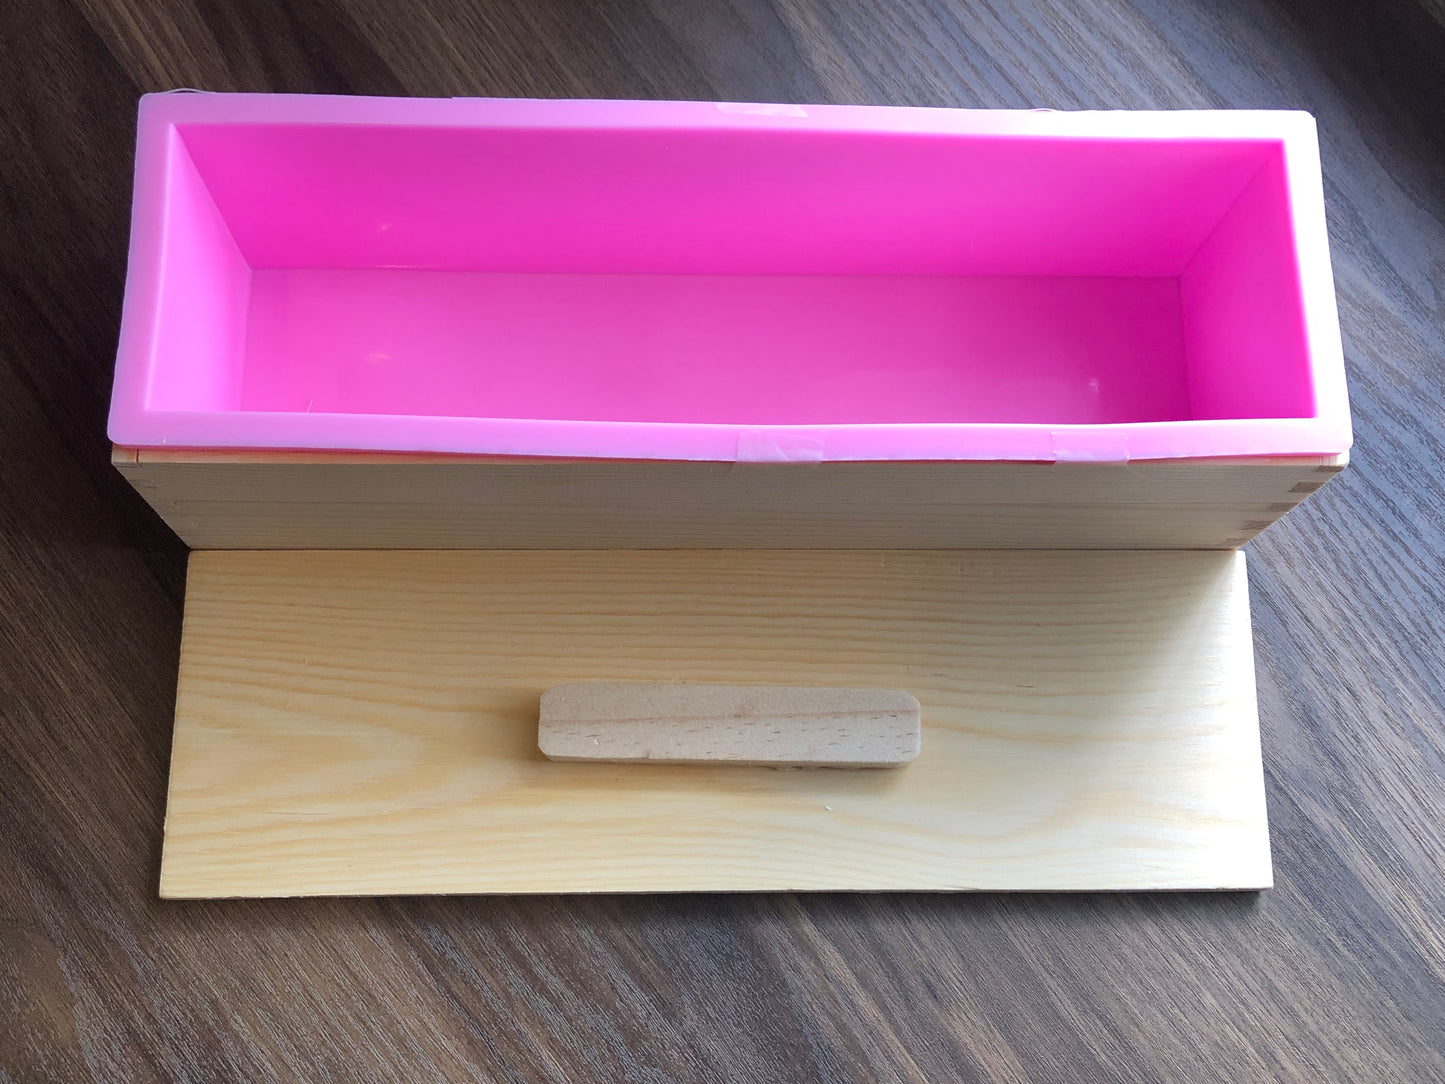 A loaf shaped wood box that houses a pink silicone mold inside rests on a wooden surface. The lid is off to the side, showing the inside of the loaf mold. The lid has a handle. The wood of the mold is light in color.